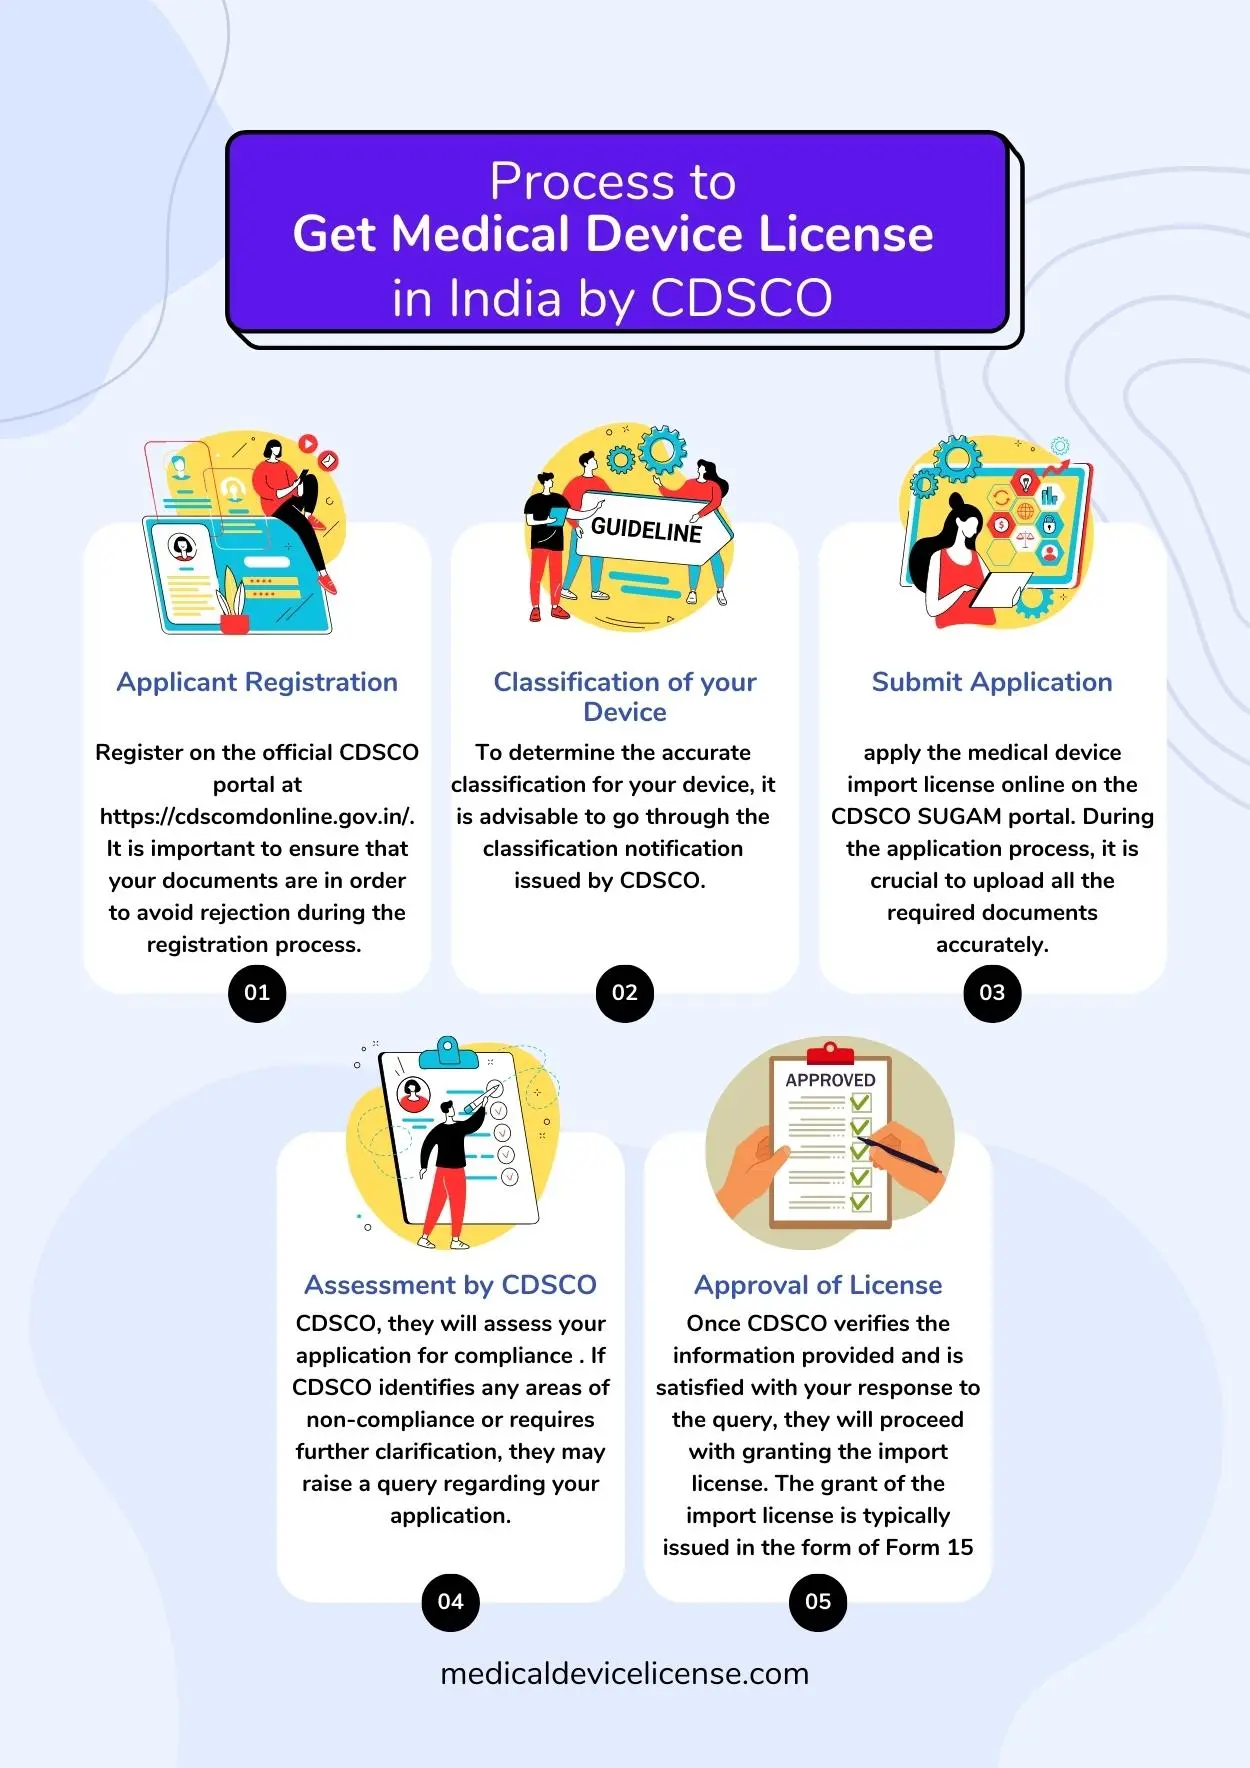 Infographic displayed 5 steps to get medical device import license from cdsco